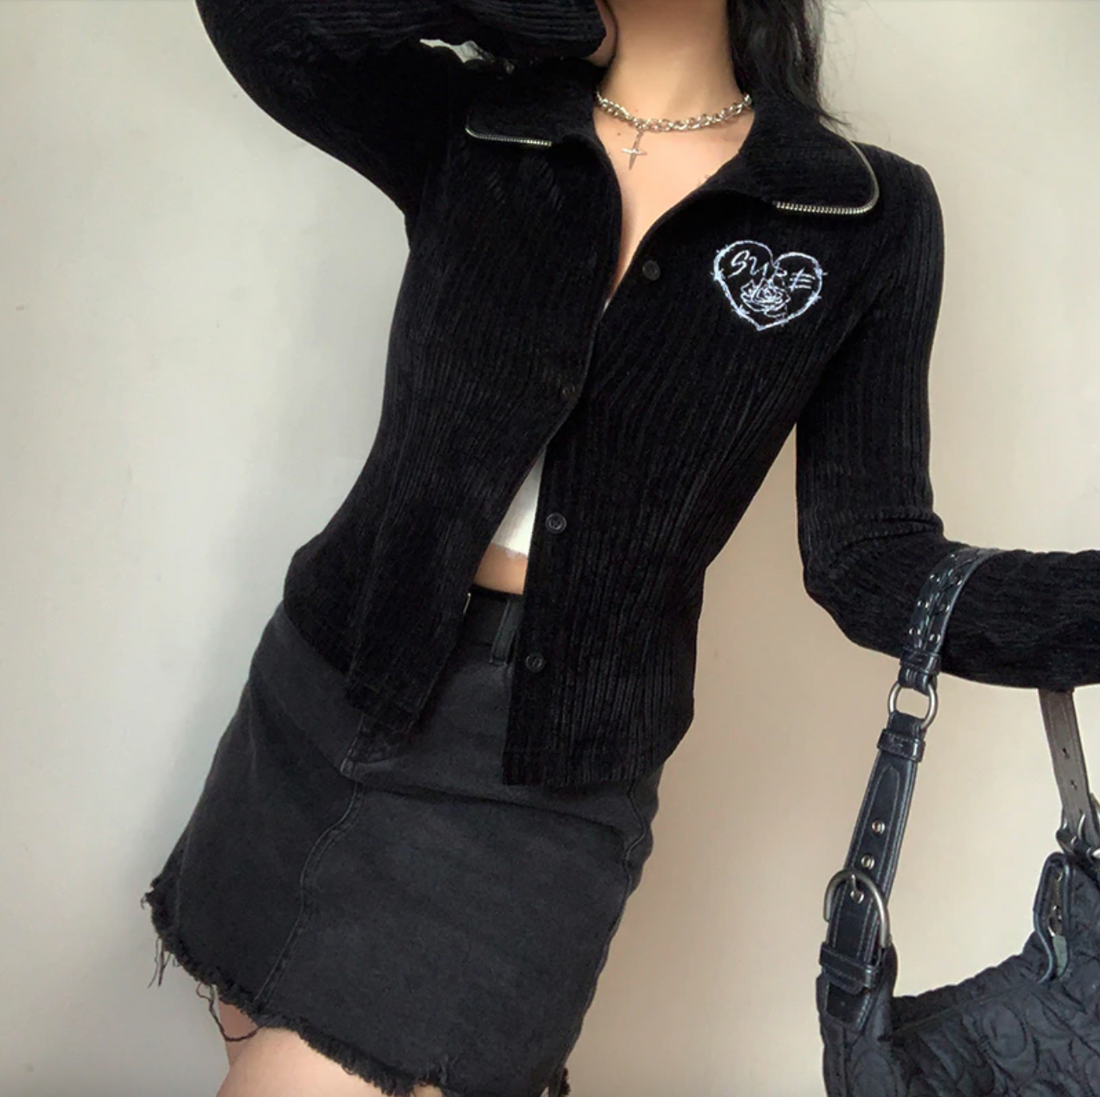 Women's Spring/Autumn Gothic Embroider Knitted Casual Preppy Style Coat